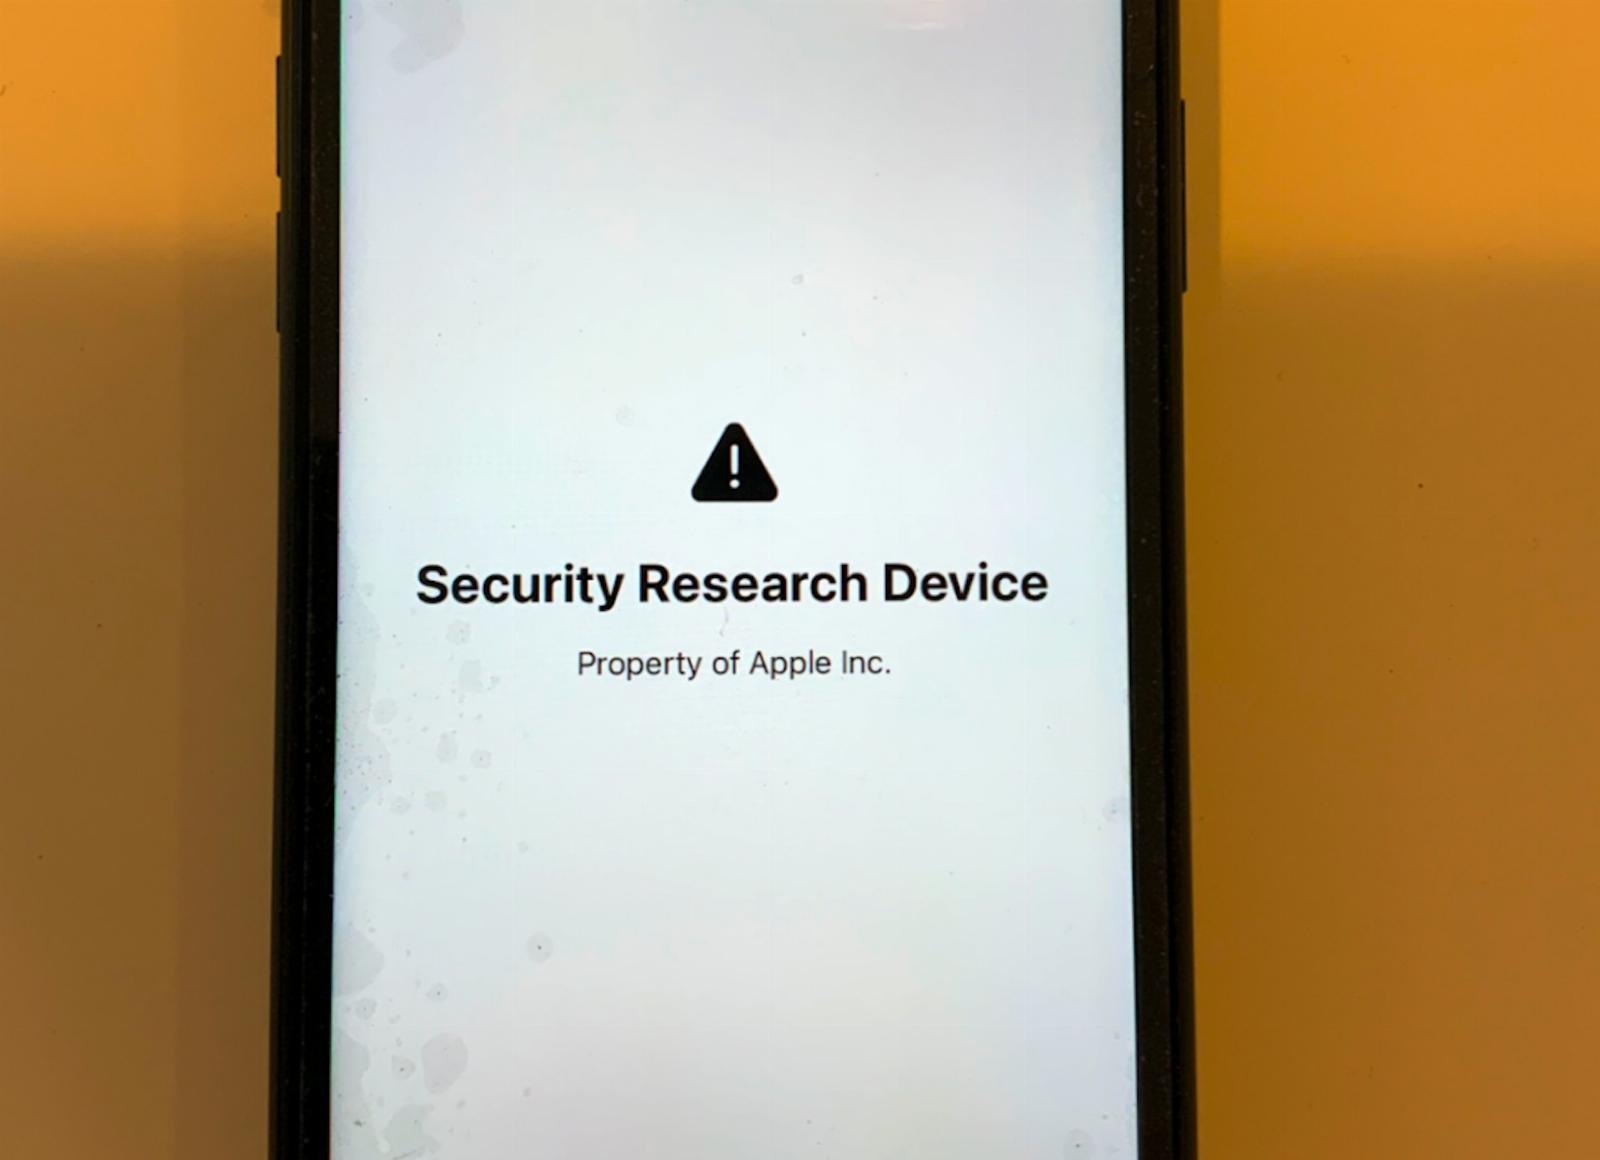 Here is Apple’s official ‘jailbroken’ iPhone for security researchers